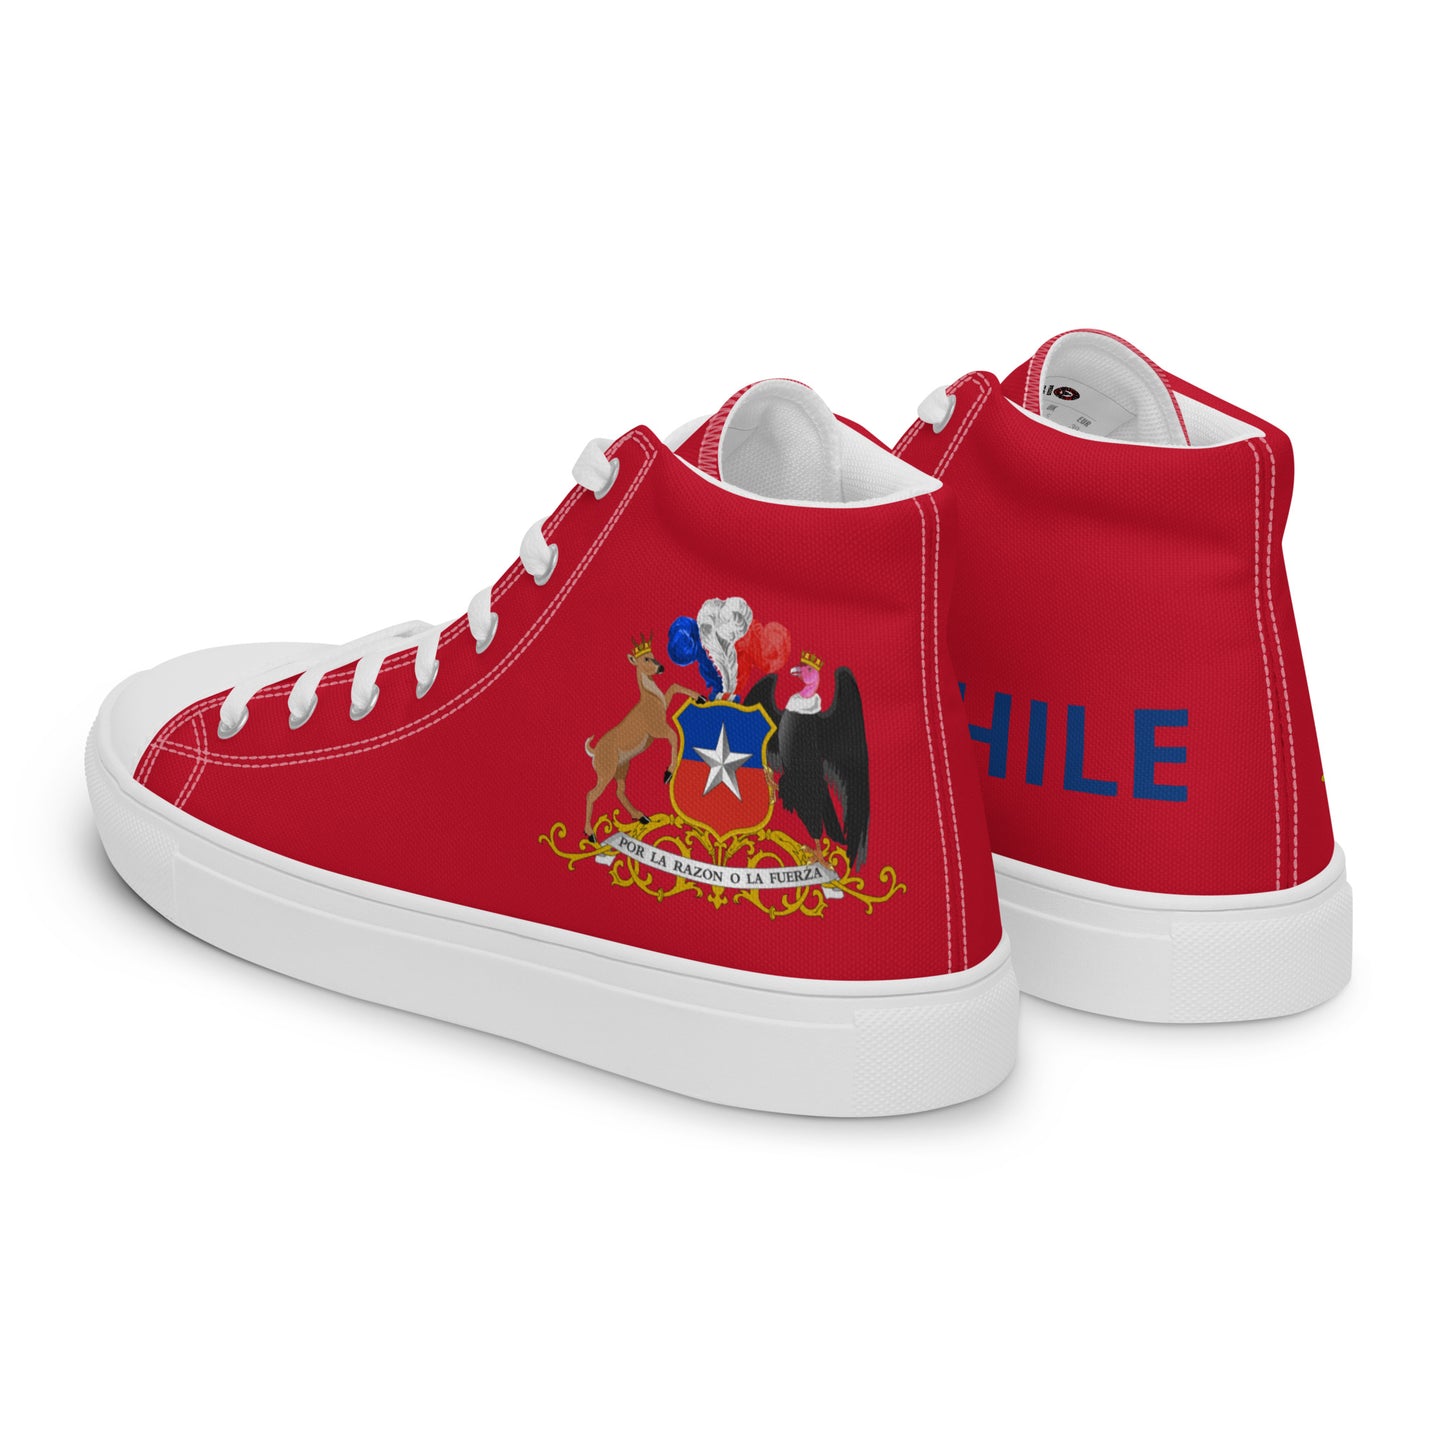 Chile - Men - Red - High top shoes